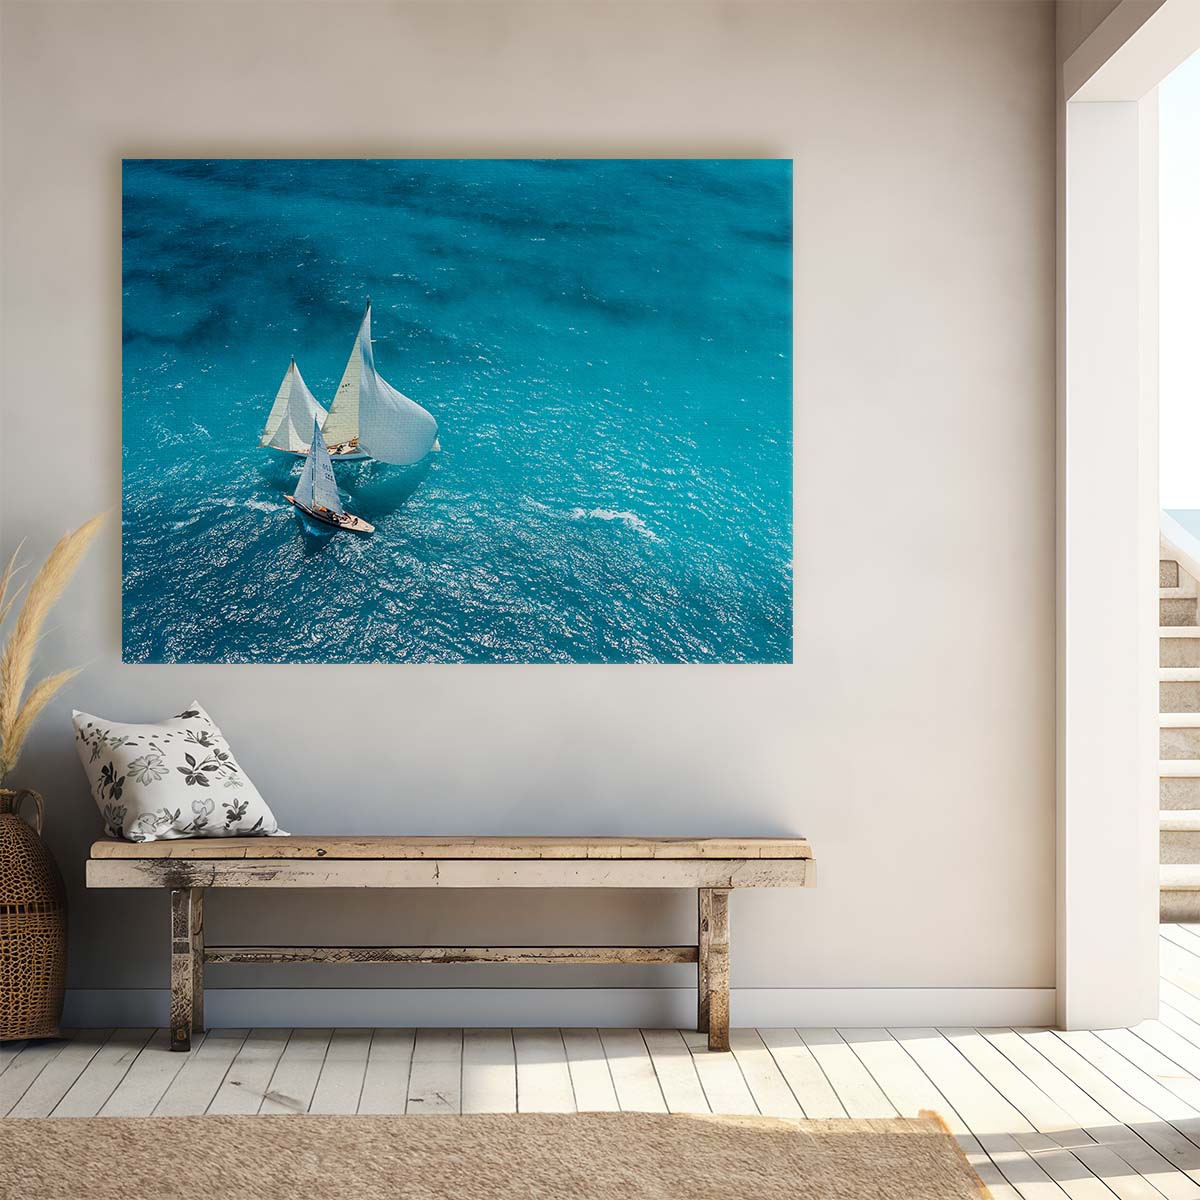 Aerial Maritime Race Adventure Seascape Wall Art by Luxuriance Designs. Made in USA.